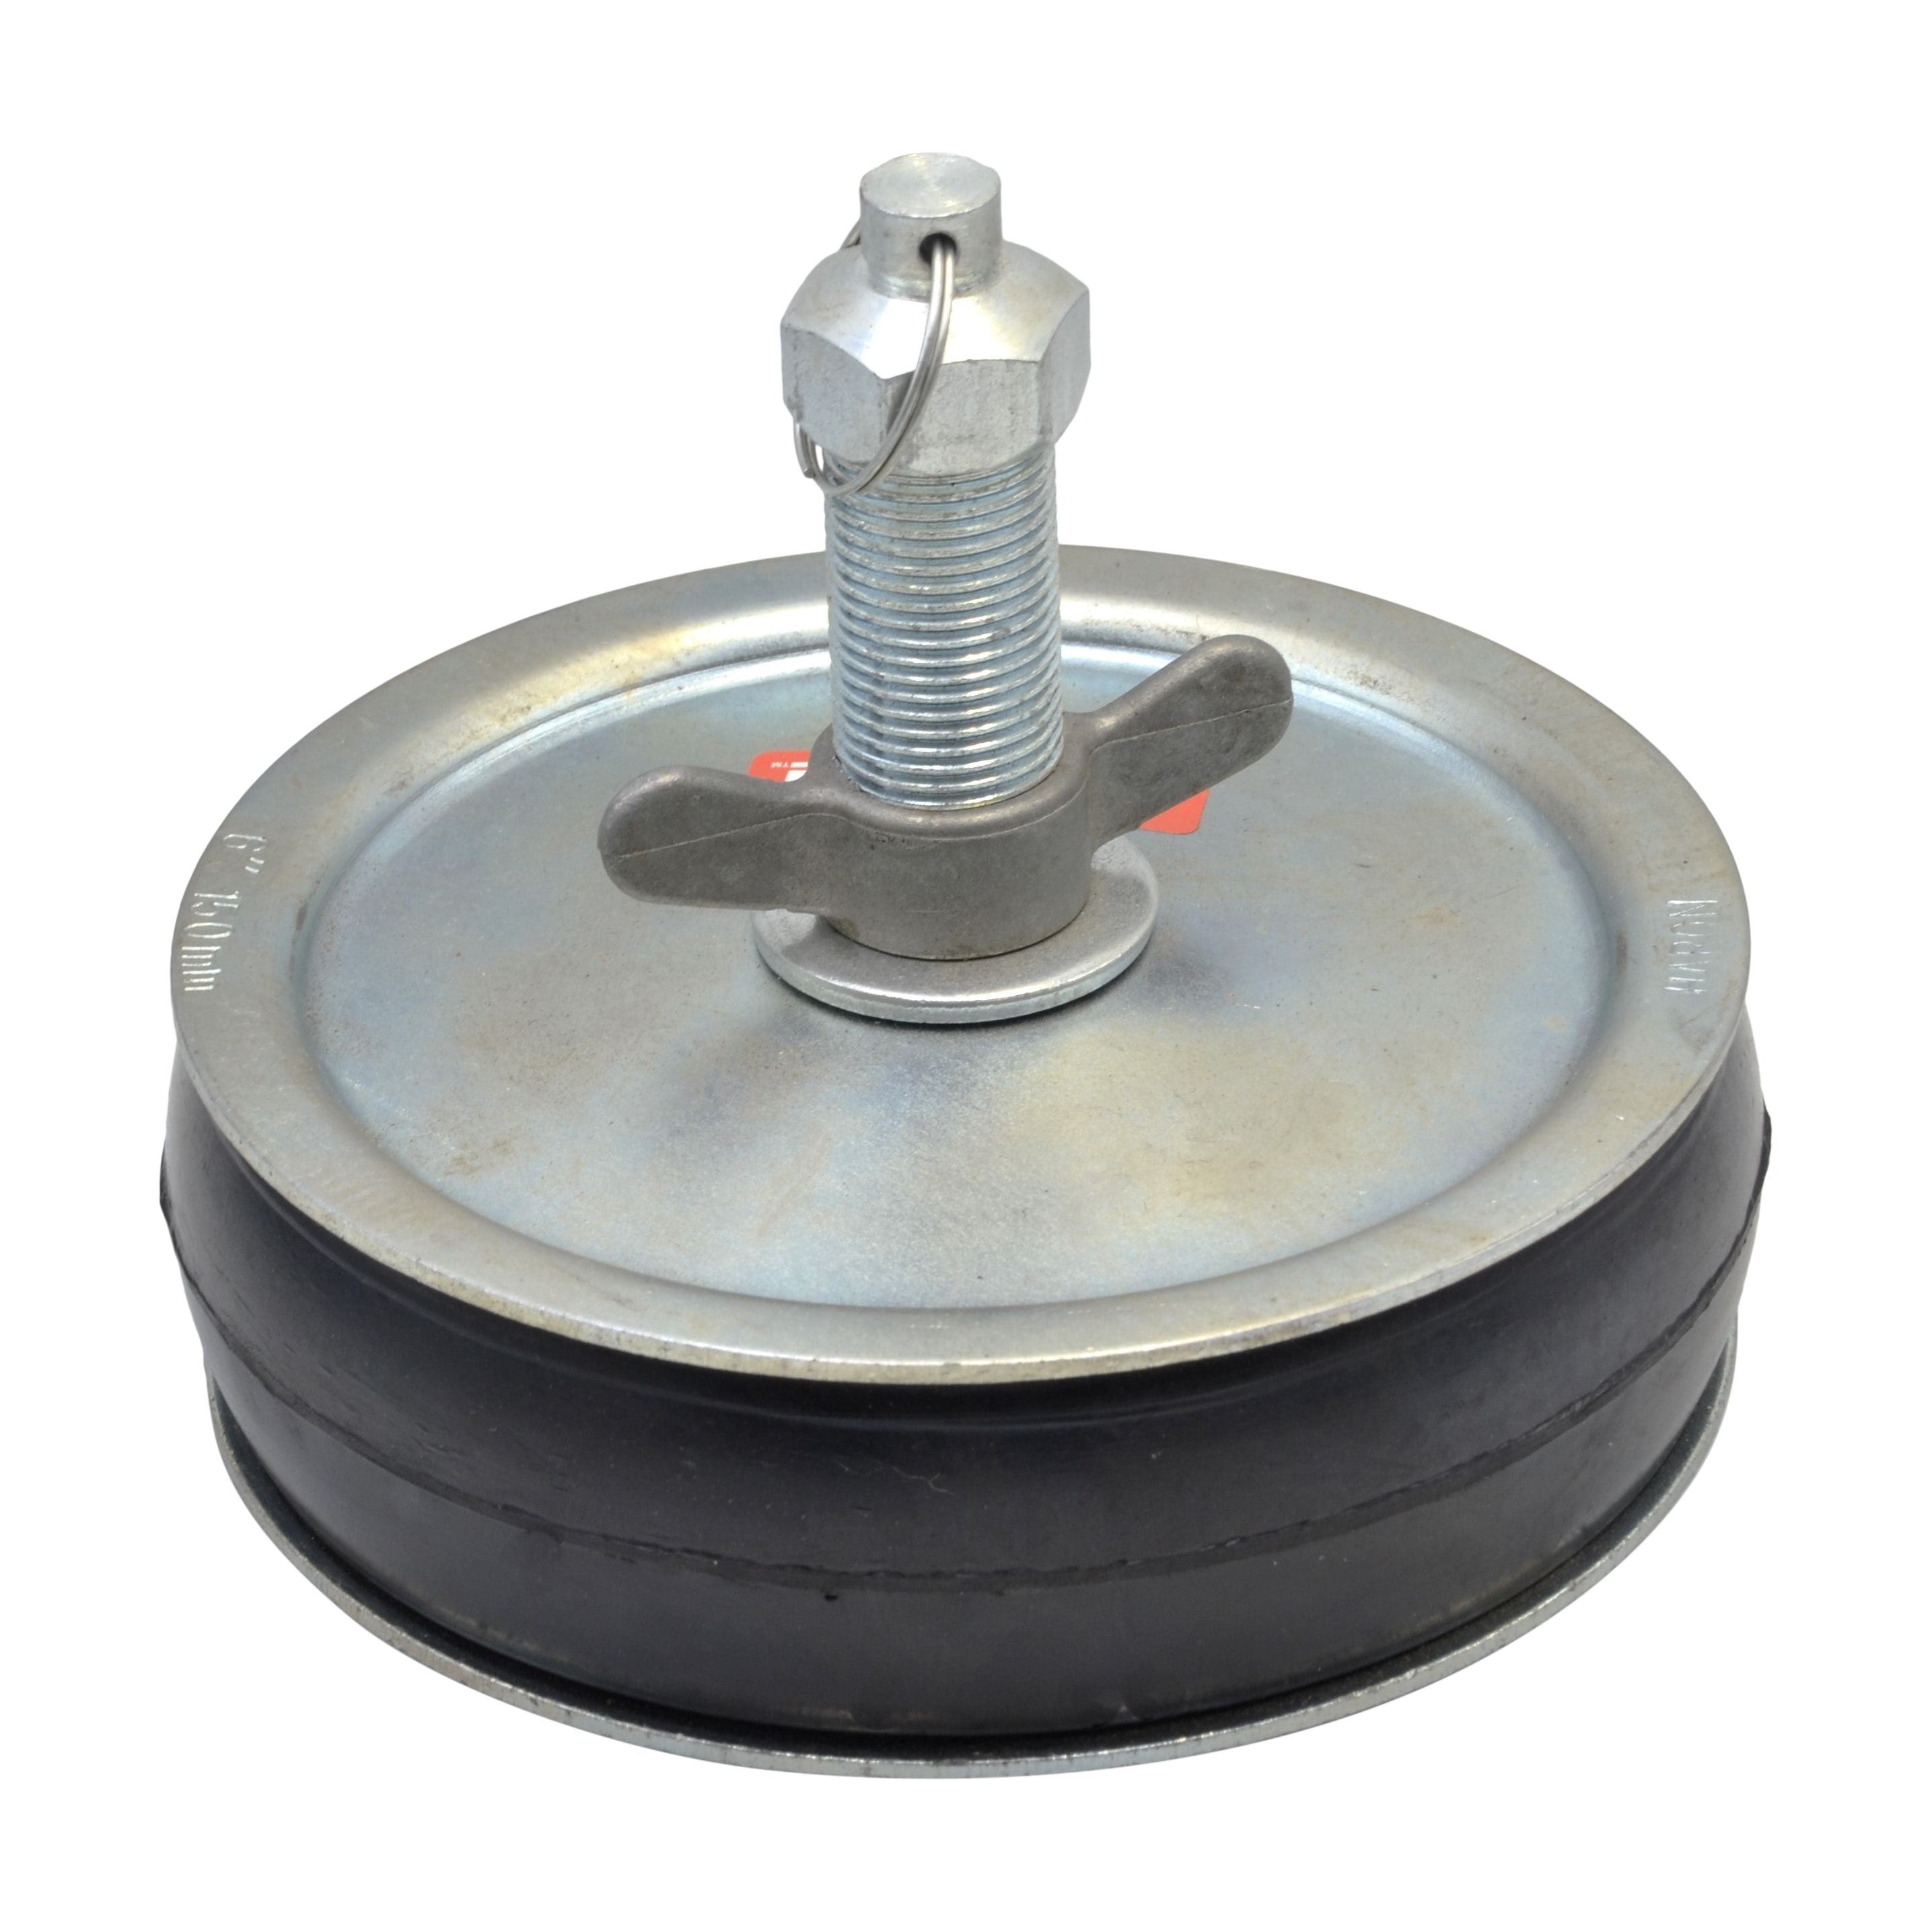 6" 150mm Steel Expanding Plug with 1/2" Bypass 140-165mm Range